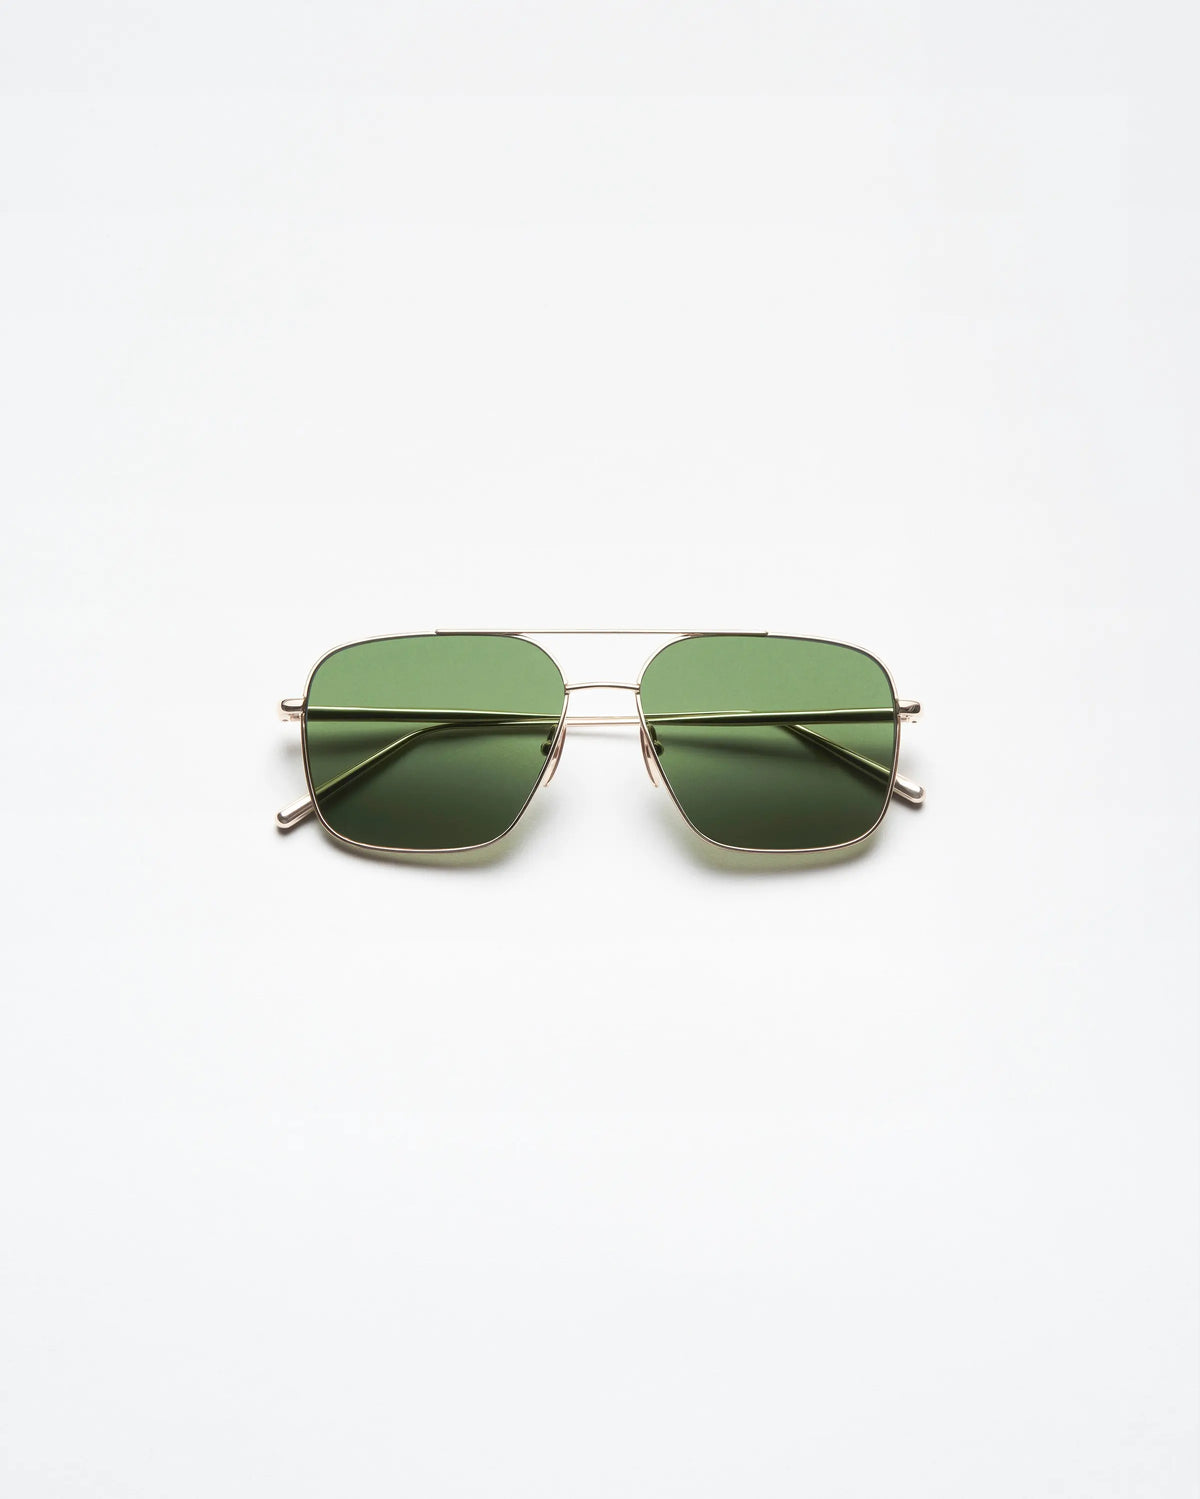 Gold coloured steel frame sunglasses with a square lense